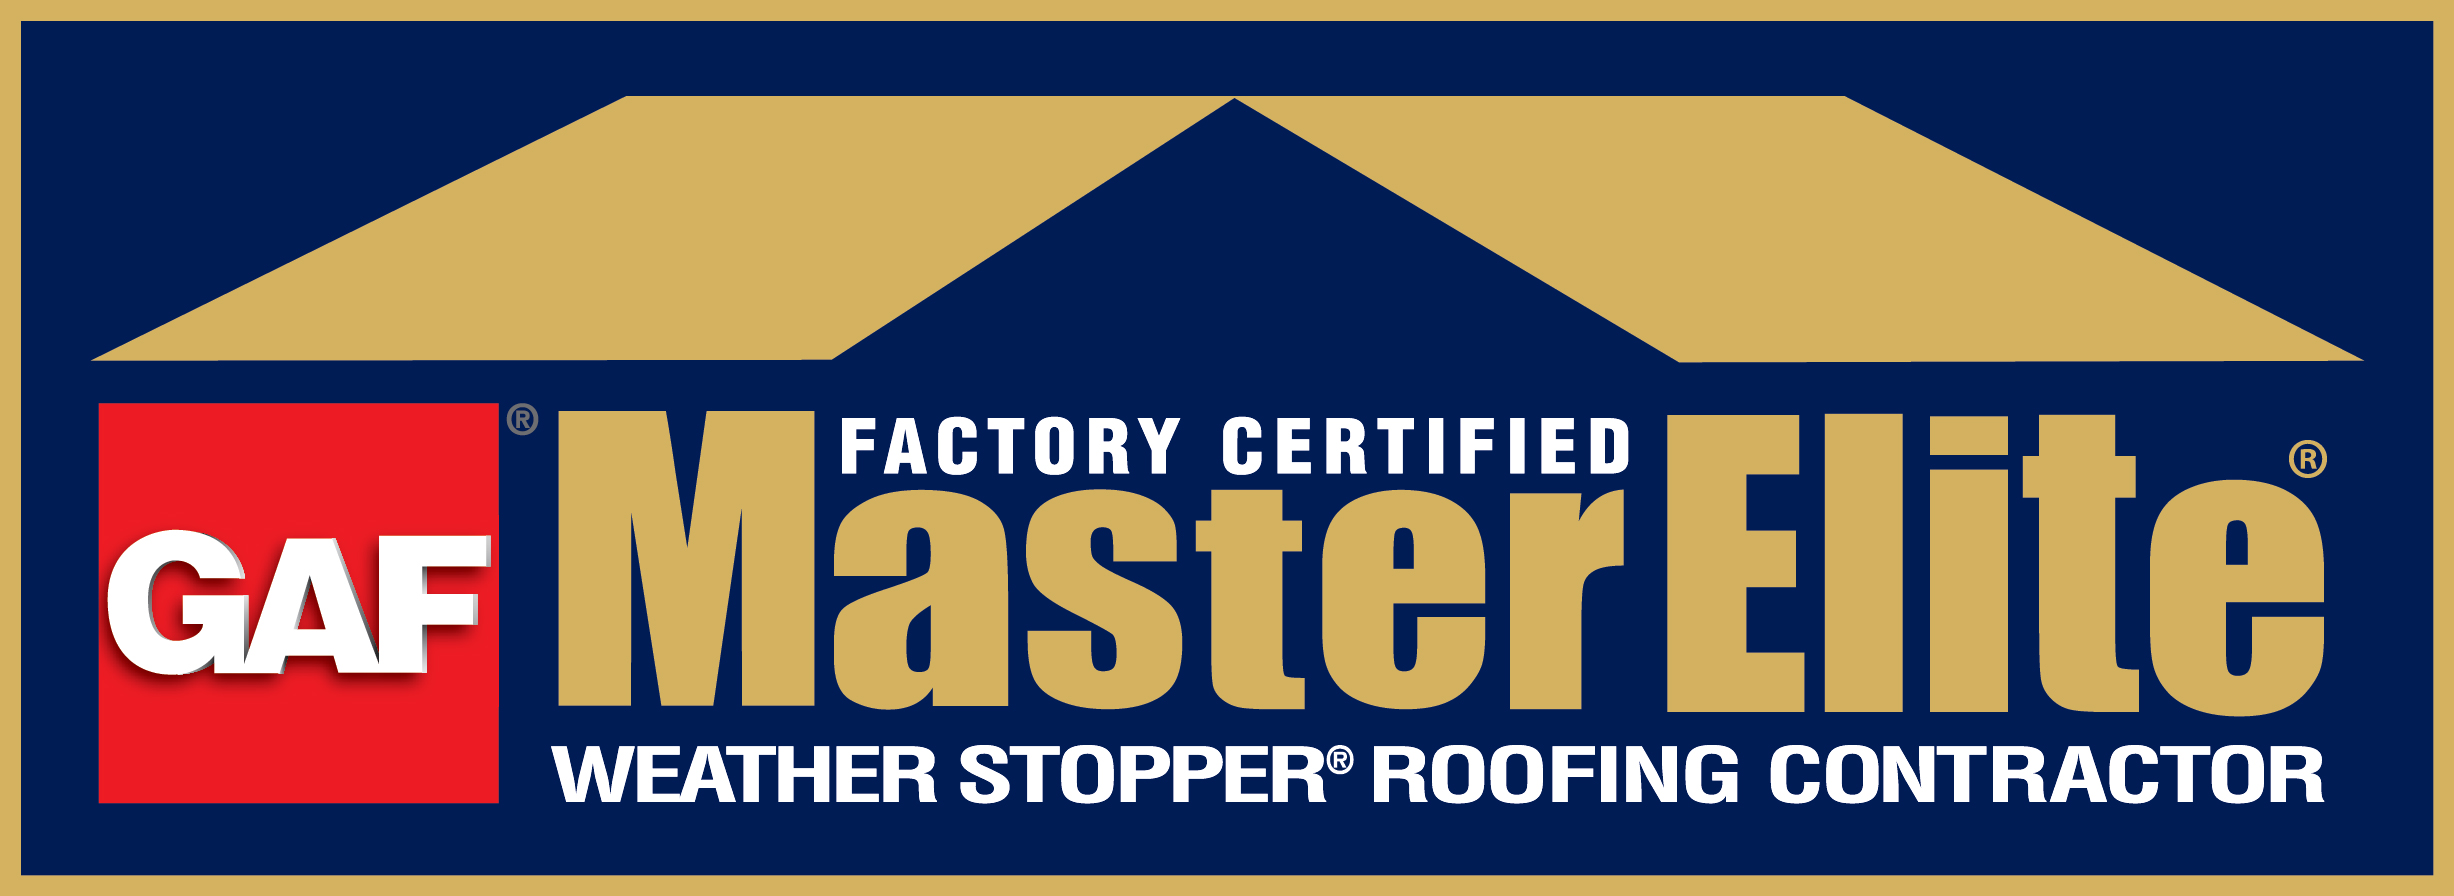 GAF Certified Weather Stopper Roofing Contractor